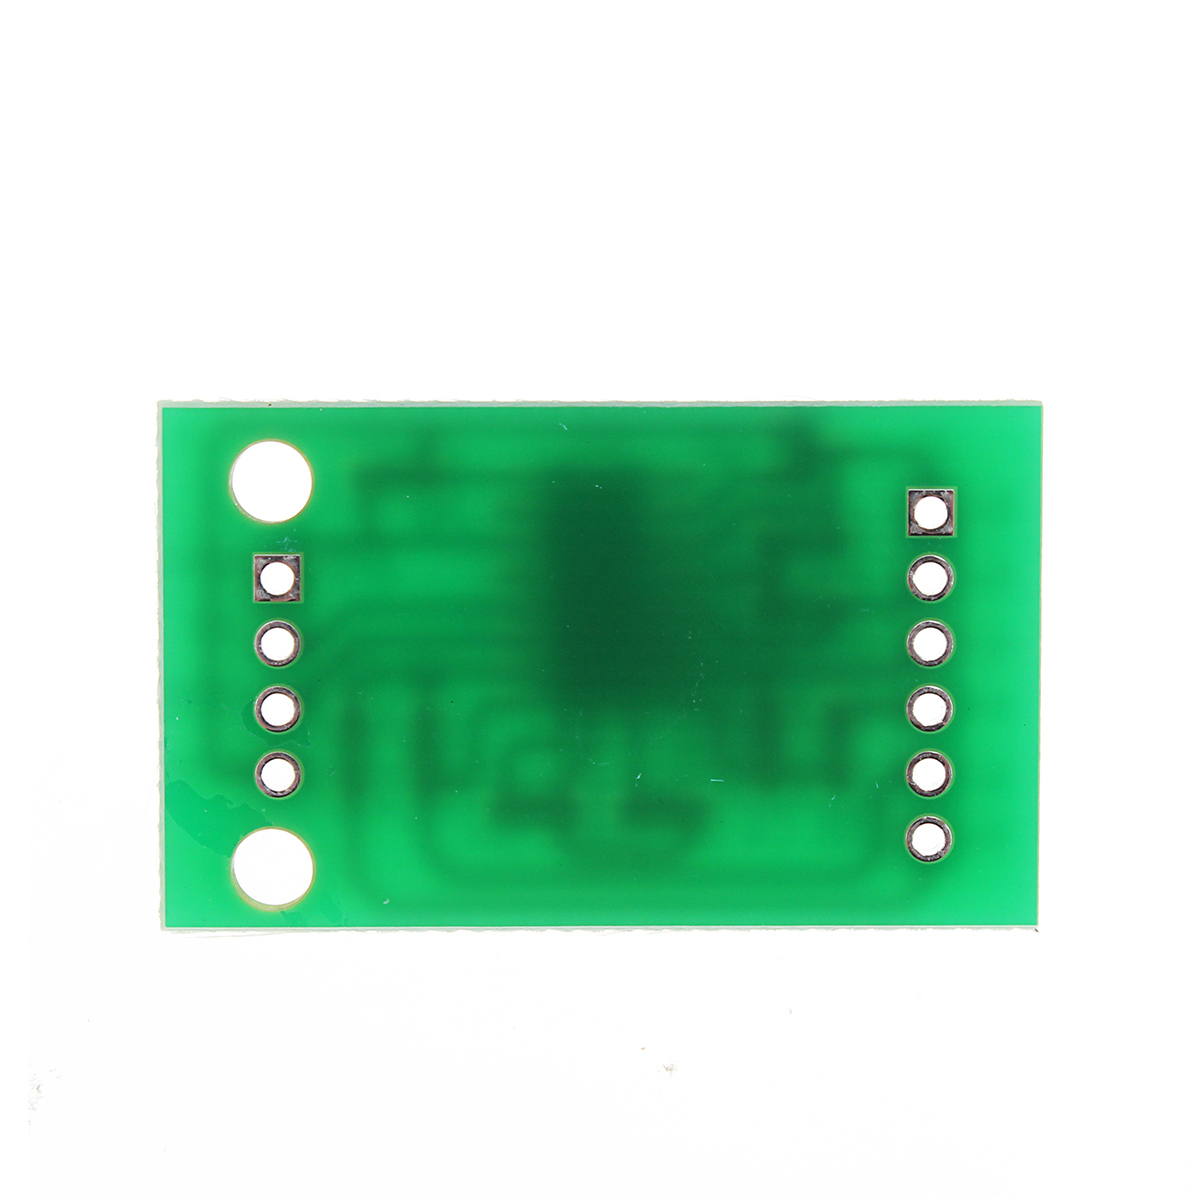 4pcs-DIY-50KG-Body-Load-Cell-Weight-Strain-Sensor-Resistance-With-HX711-AD-Module-1326815-7